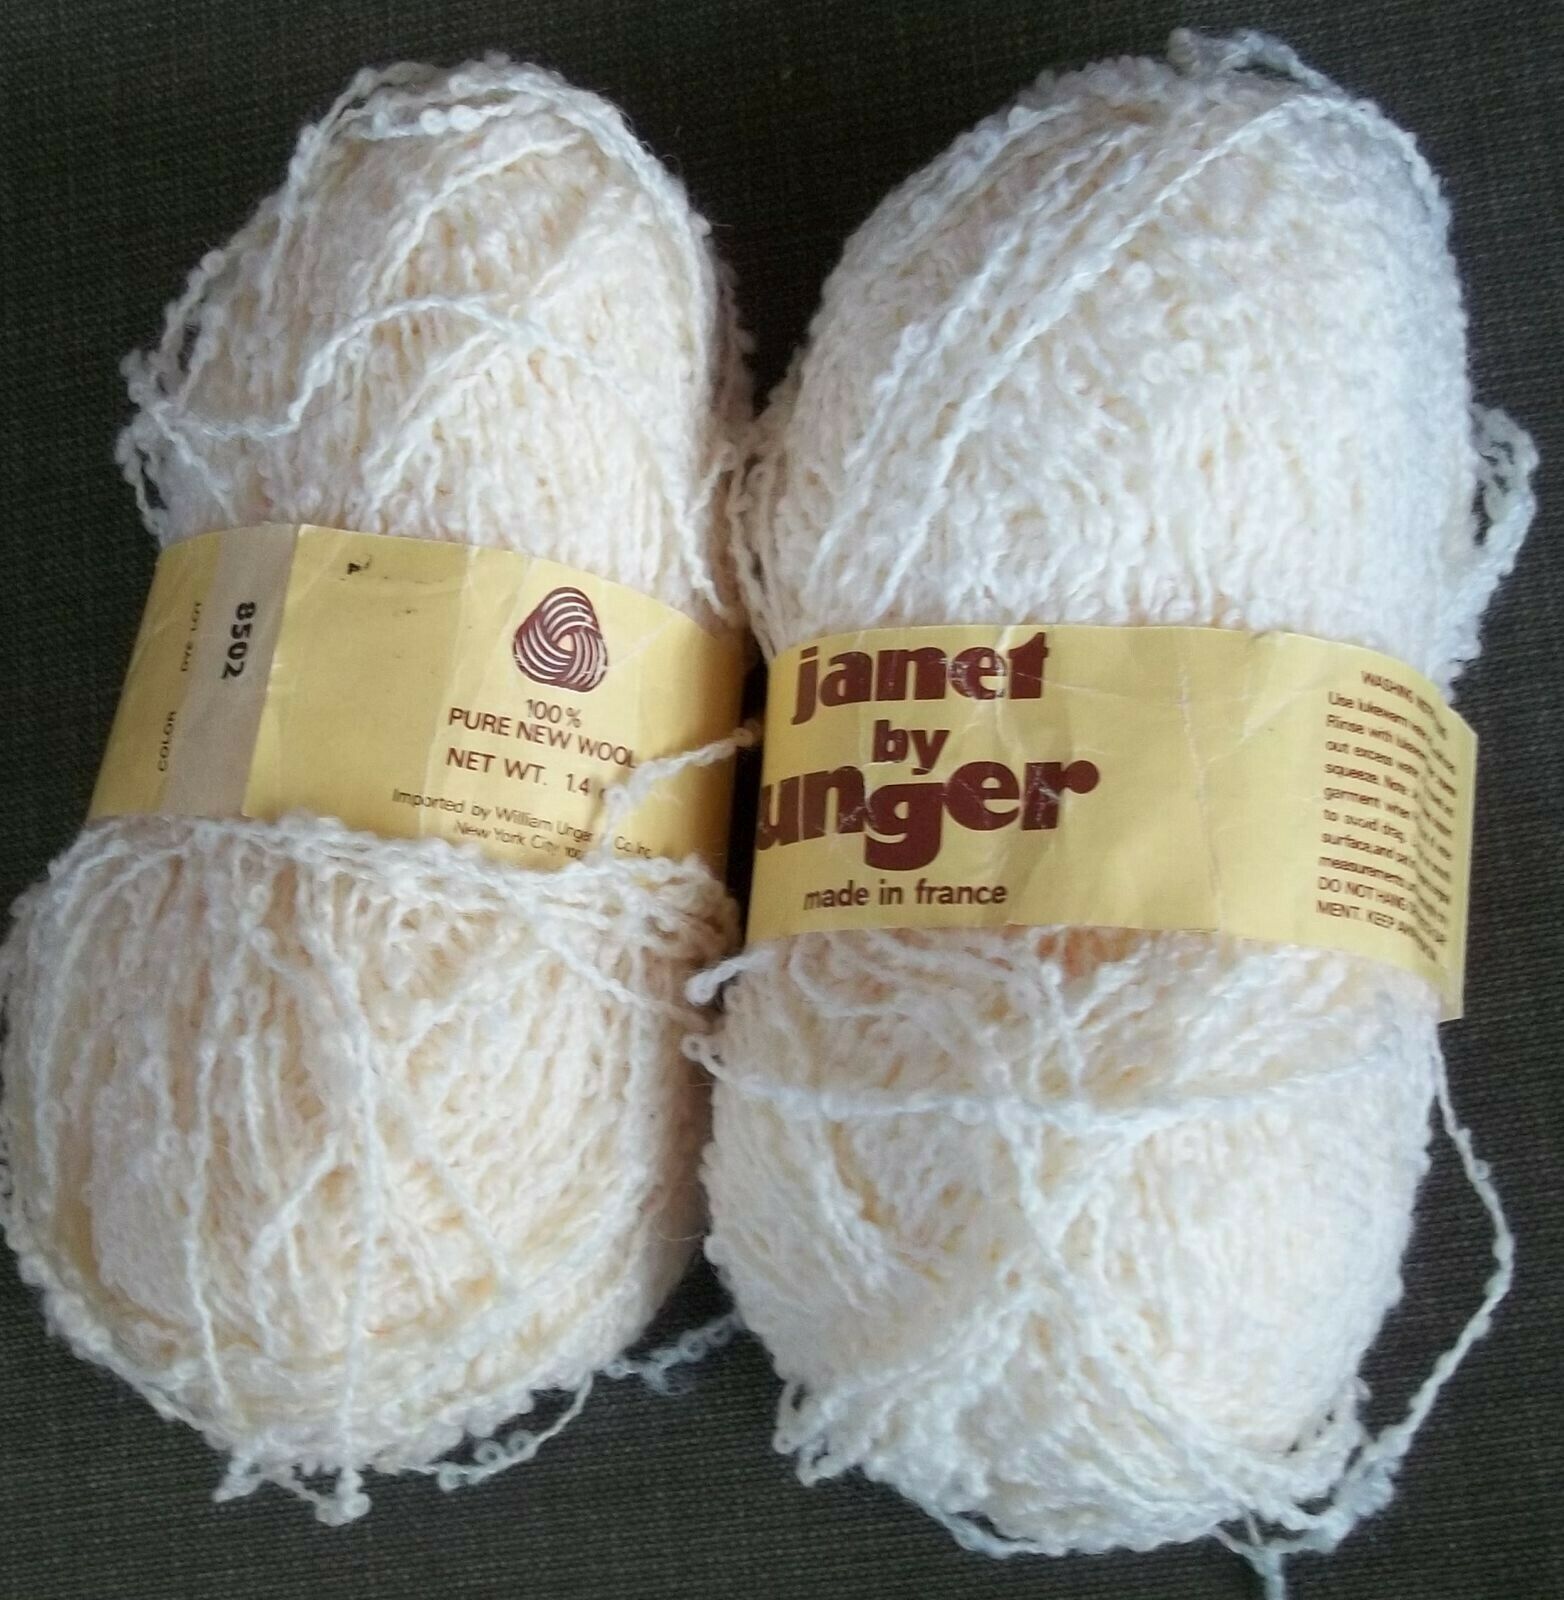 Primary image for 100% Wool Made in France Janet by Unger Yarn 2 Skeins White